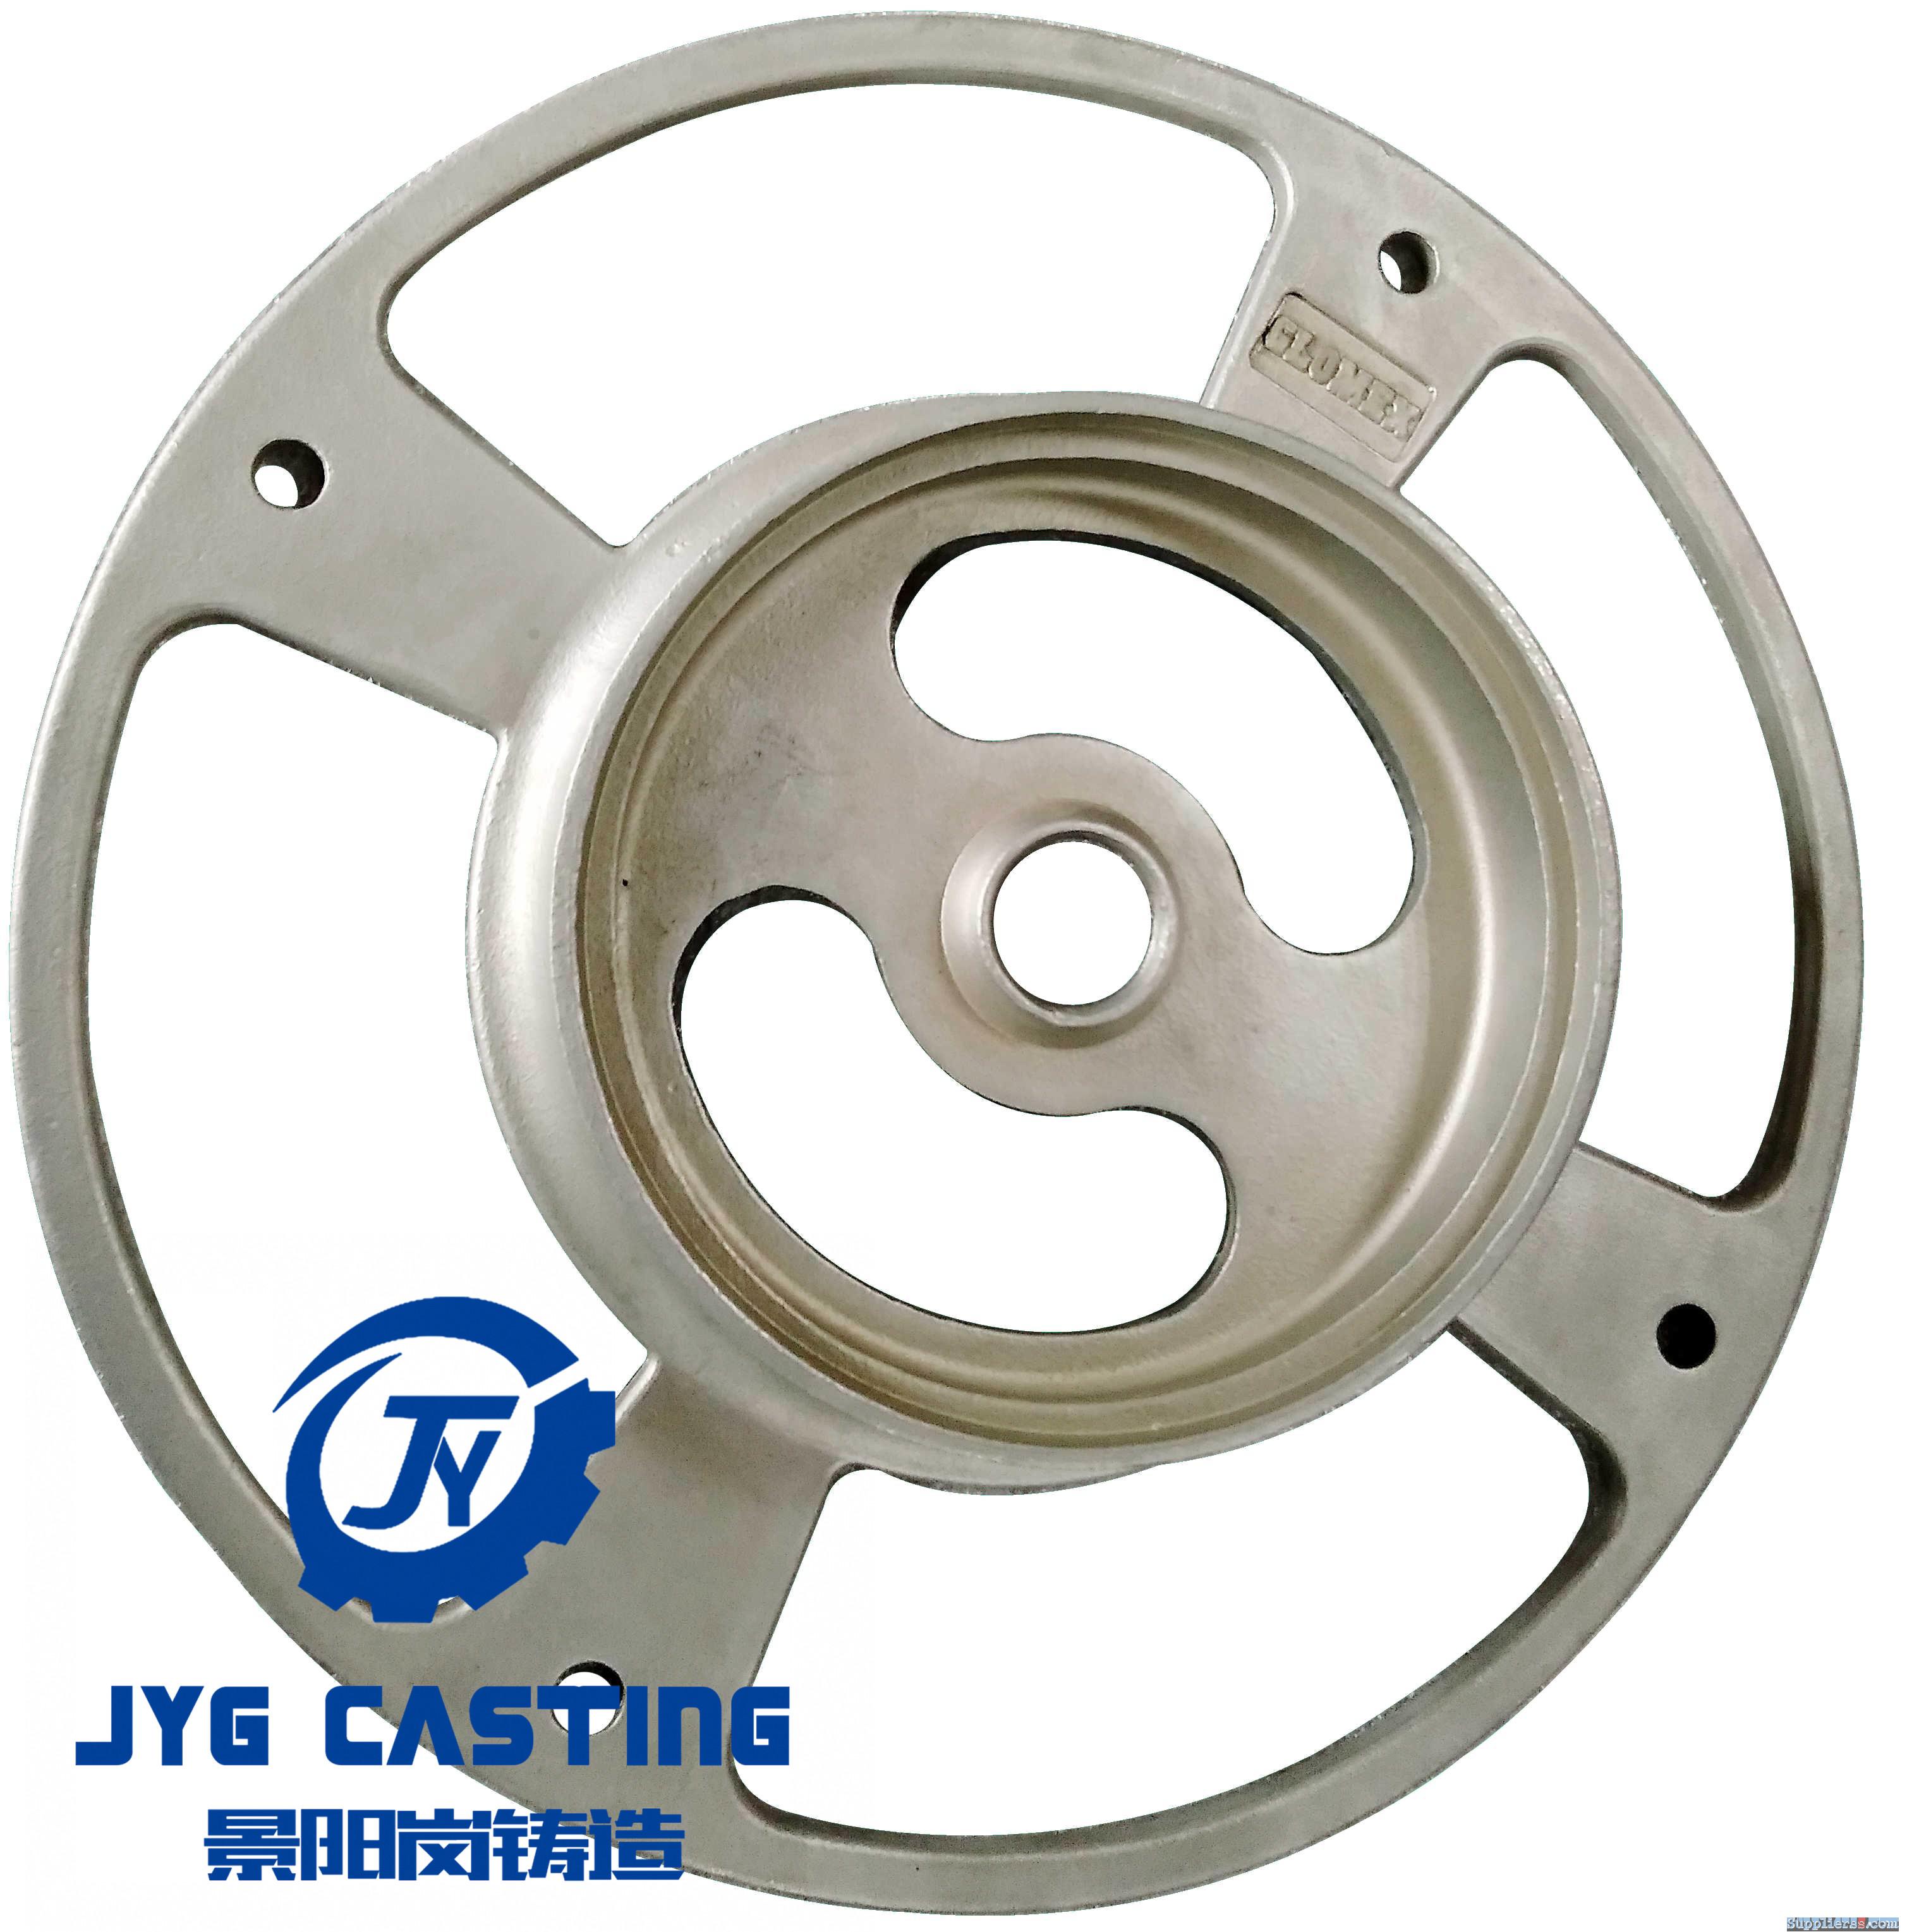 JYG Casting Customizes Investment Casting Machinery Parts